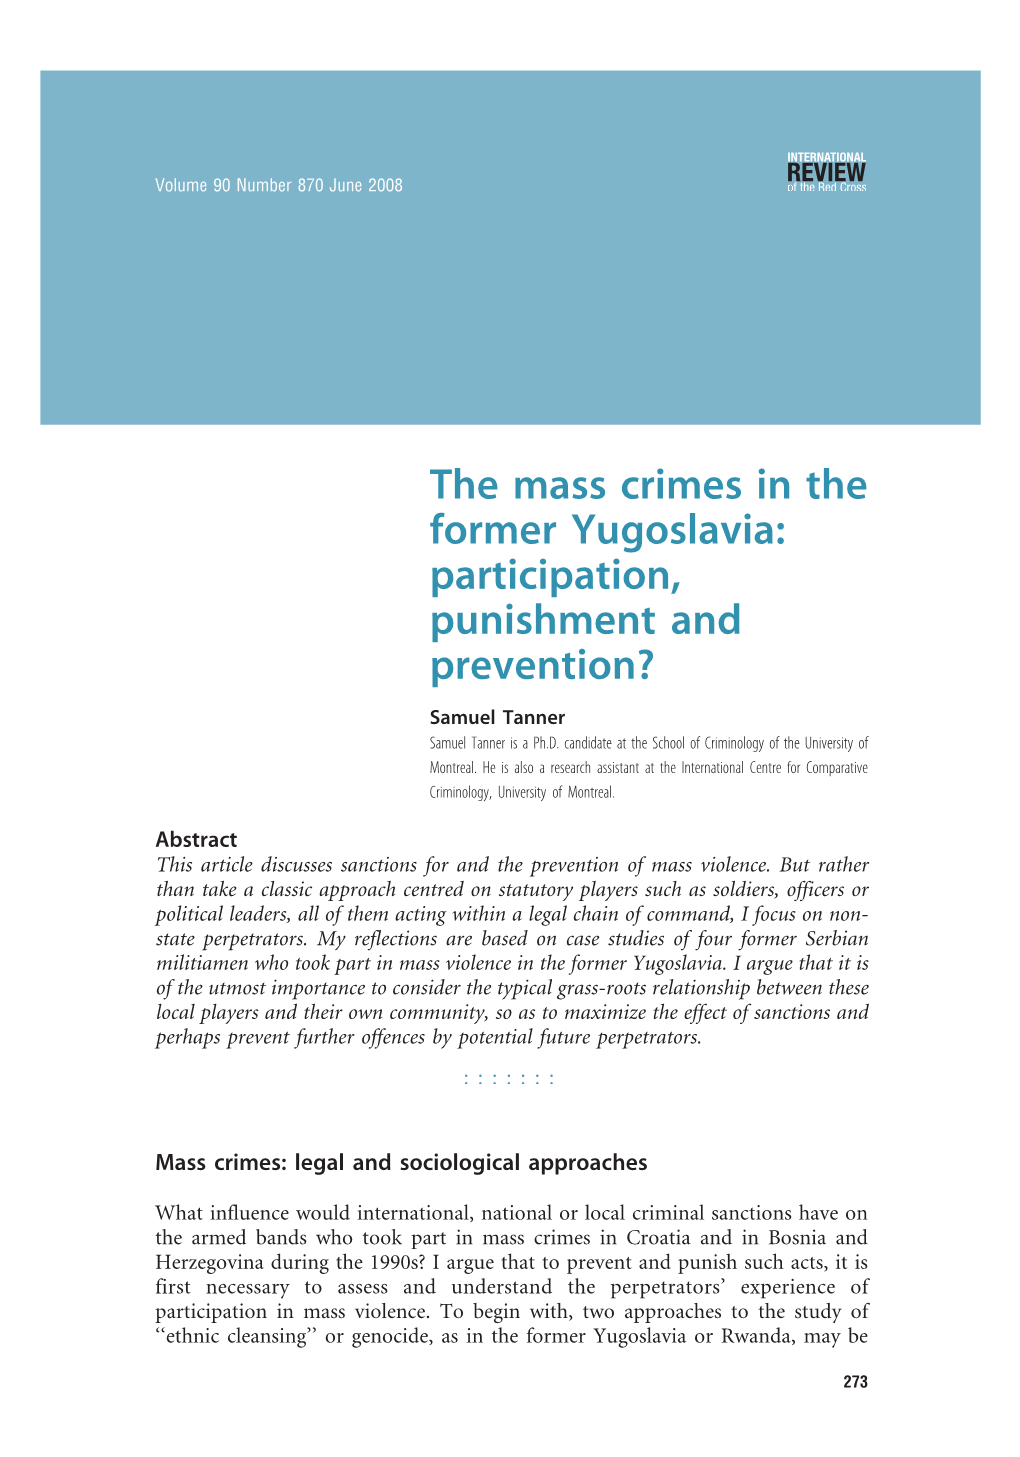 The Mass Crimes in the Former Yugoslavia: Participation, Punishment and Prevention? Samuel Tanner Samuel Tanner Is a Ph.D